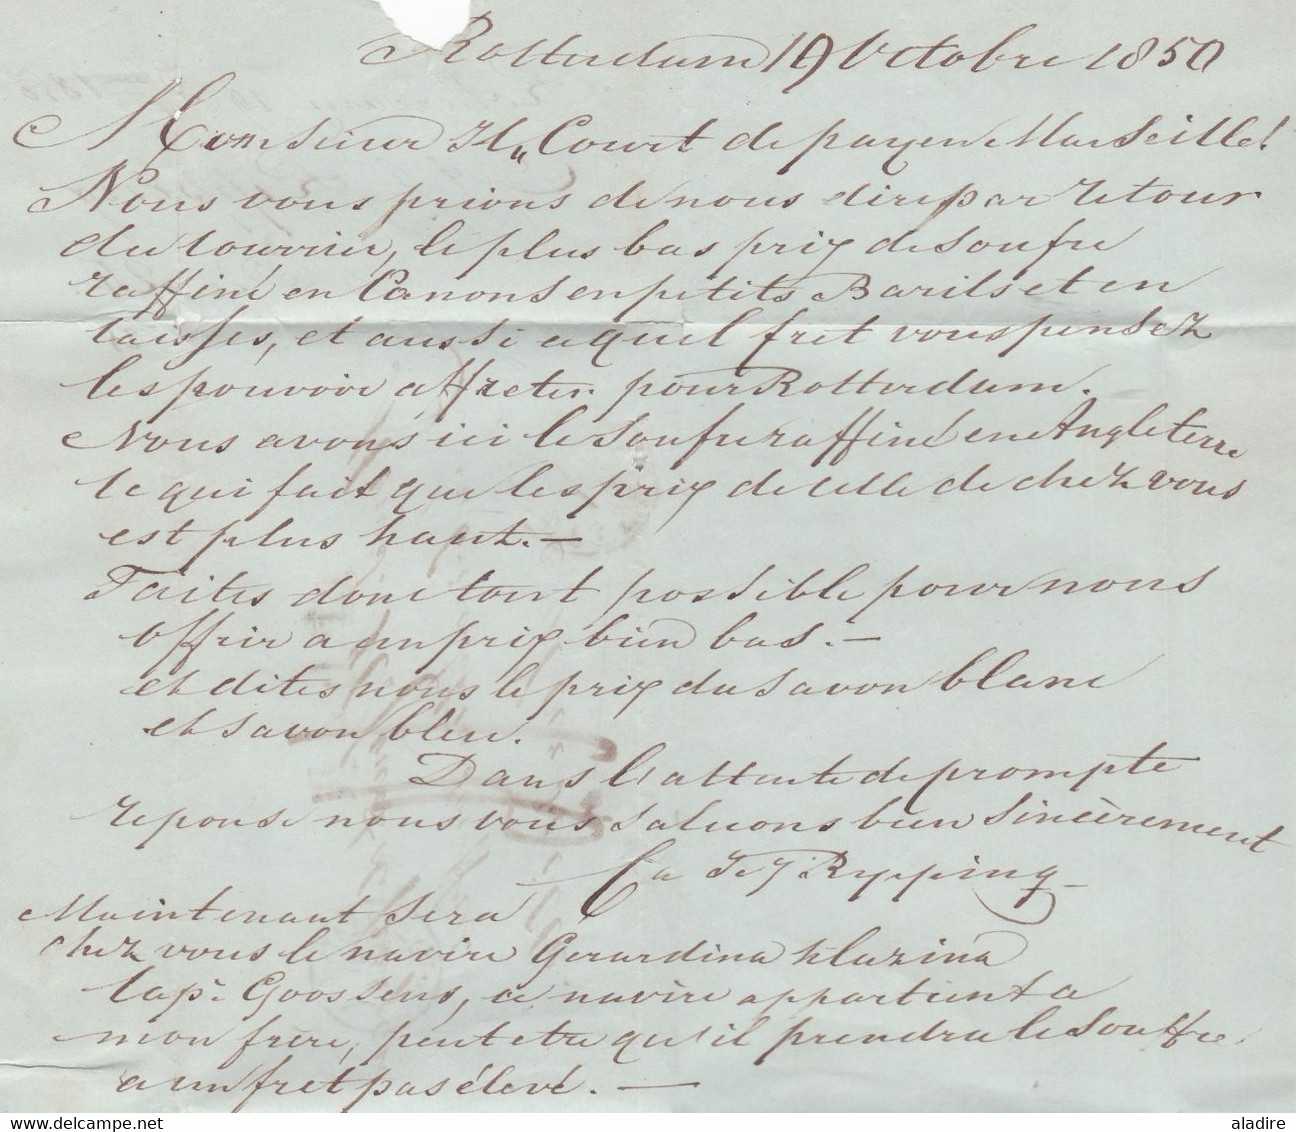 1850 - Folded letter in French from Rotterdam to Marseille, France - entry at Valenciennes - tax 18 - white & blue soaps